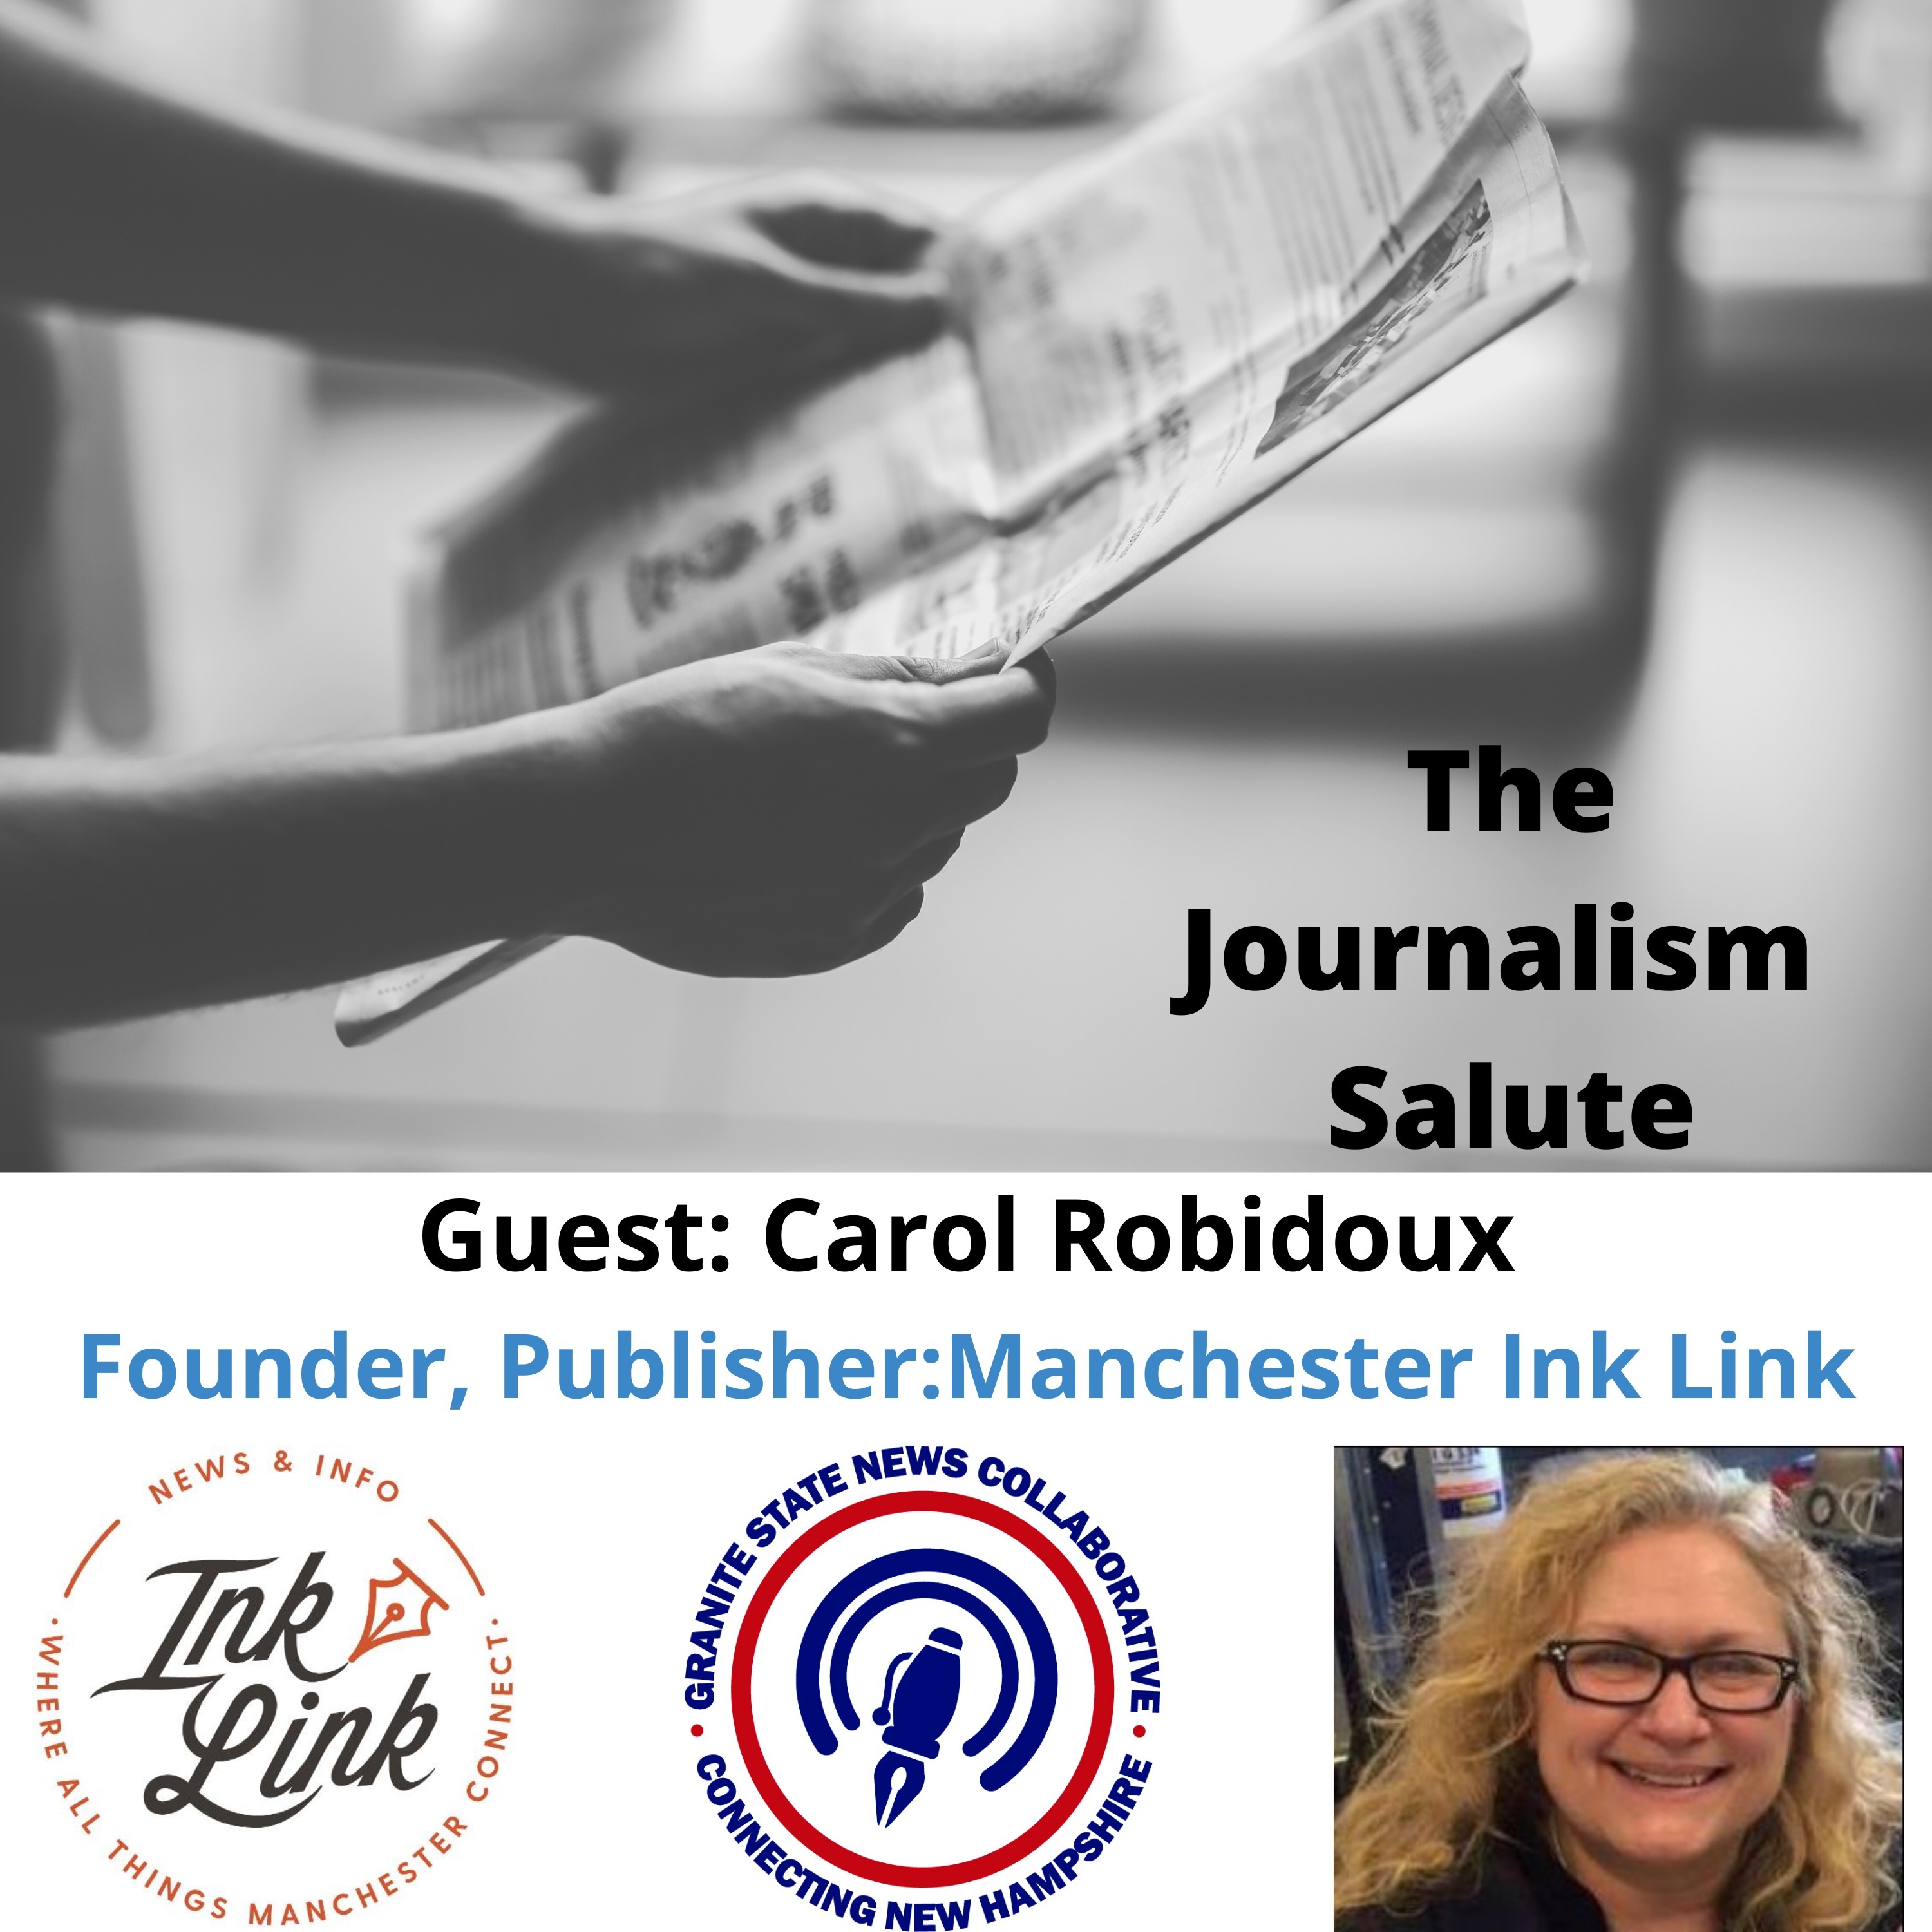 Carol Robidoux: Manchester Ink Link & a Lesson in Entrepreneurial Journalism